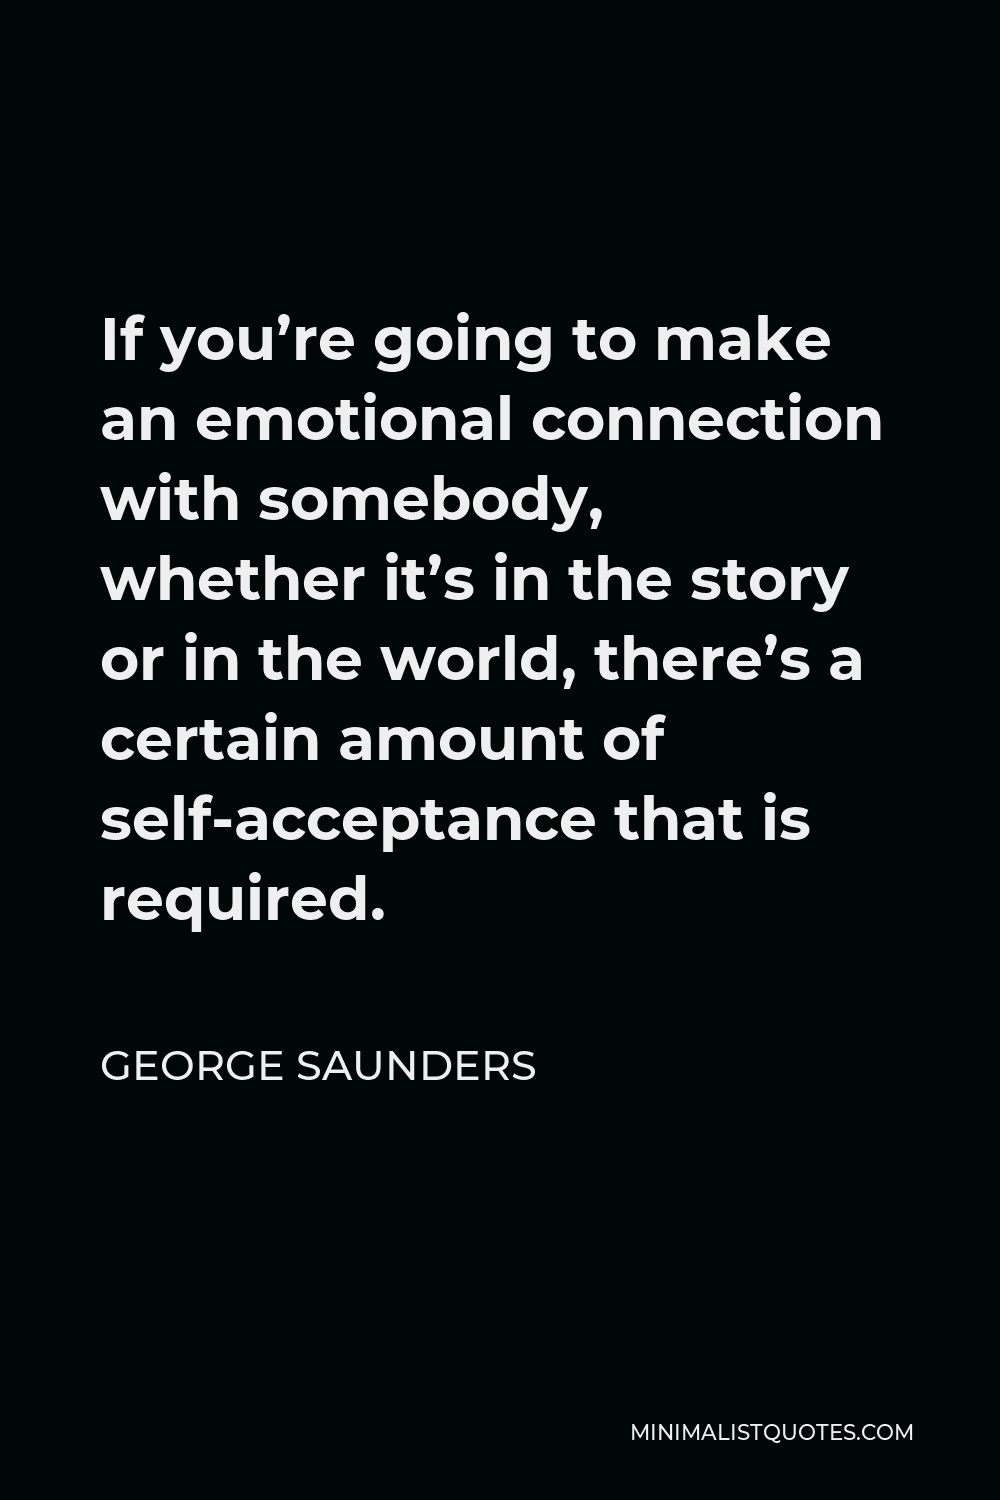 George Saunders Quote - If you’re going to make an emotional connection with somebody, whether it’s in the story or in the world, there’s a certain amount of self-acceptance that is required.